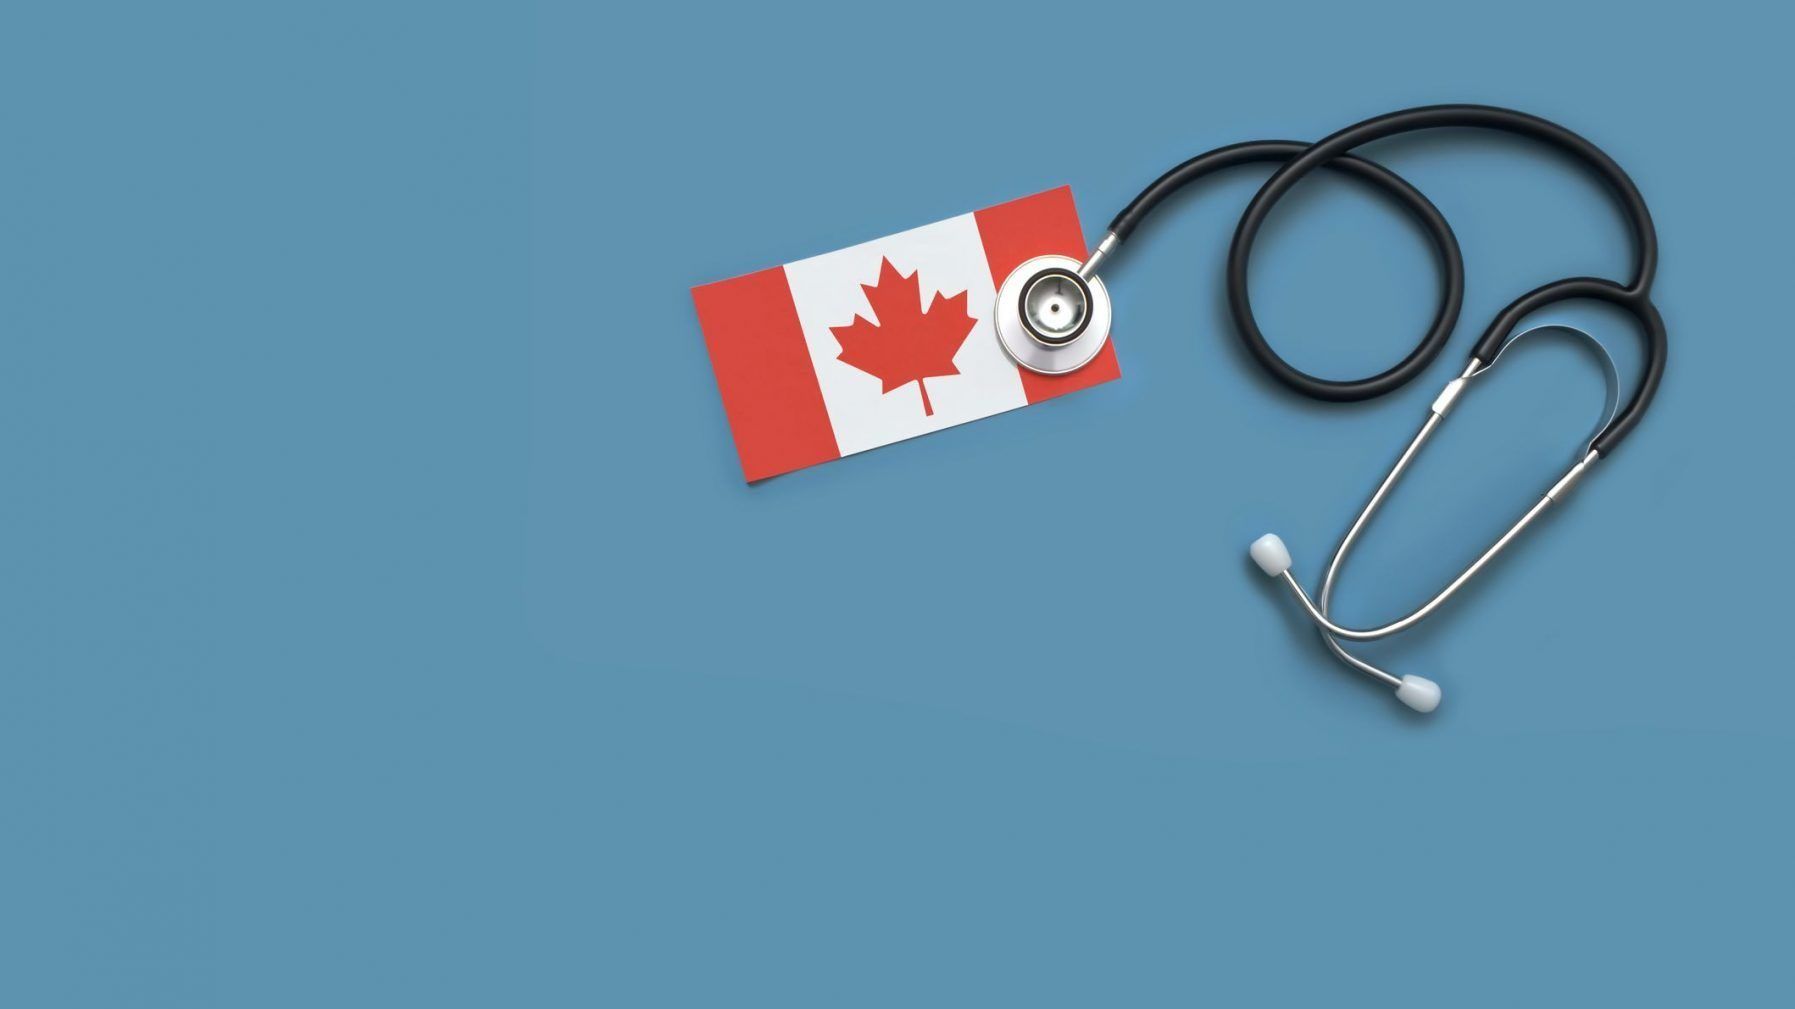 One winner was Toronto-based FirstHx, a medical intake platform designed to record a patient's health history before their medical appointment. GETTY